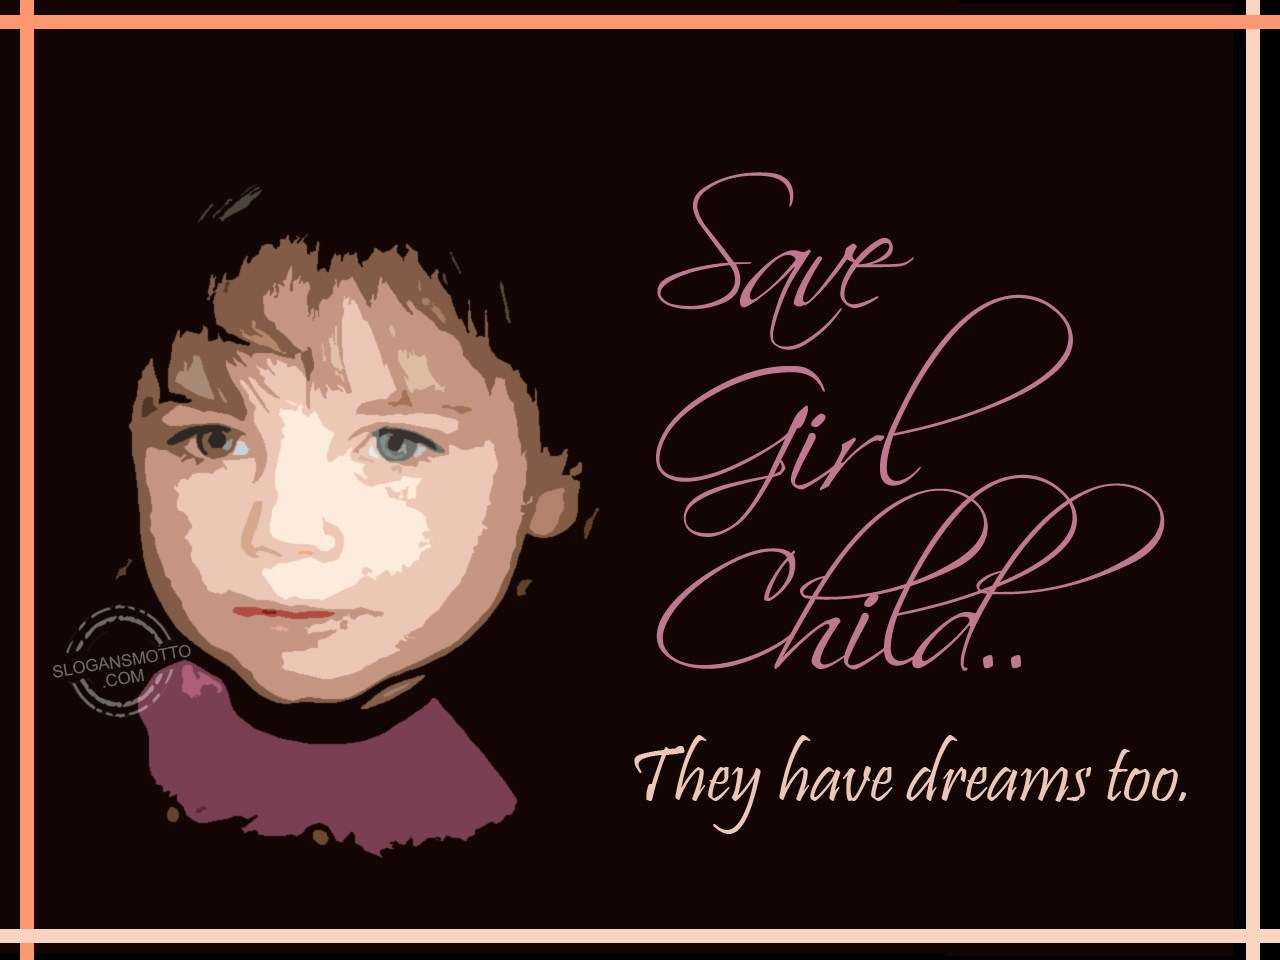 Save girl child..they have dreams too. | SlogansMotto.com